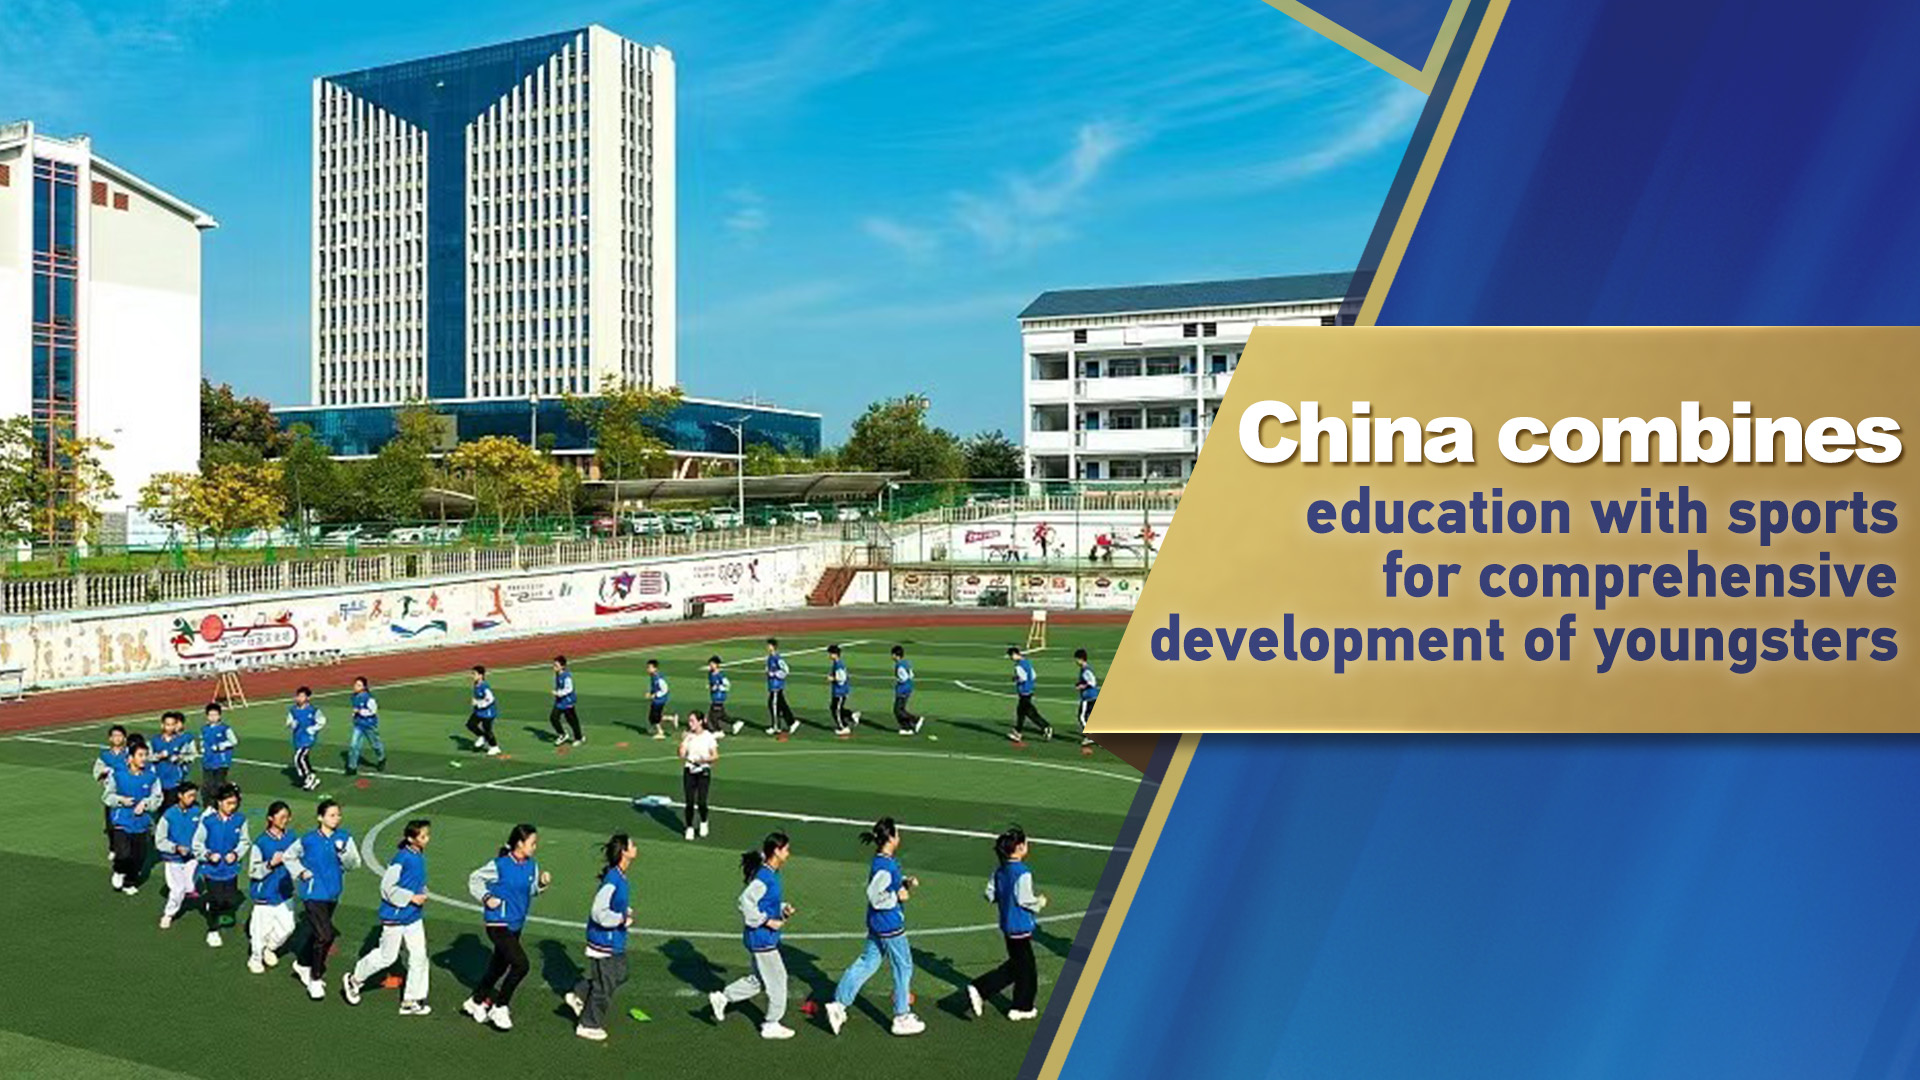 China combines education with sports